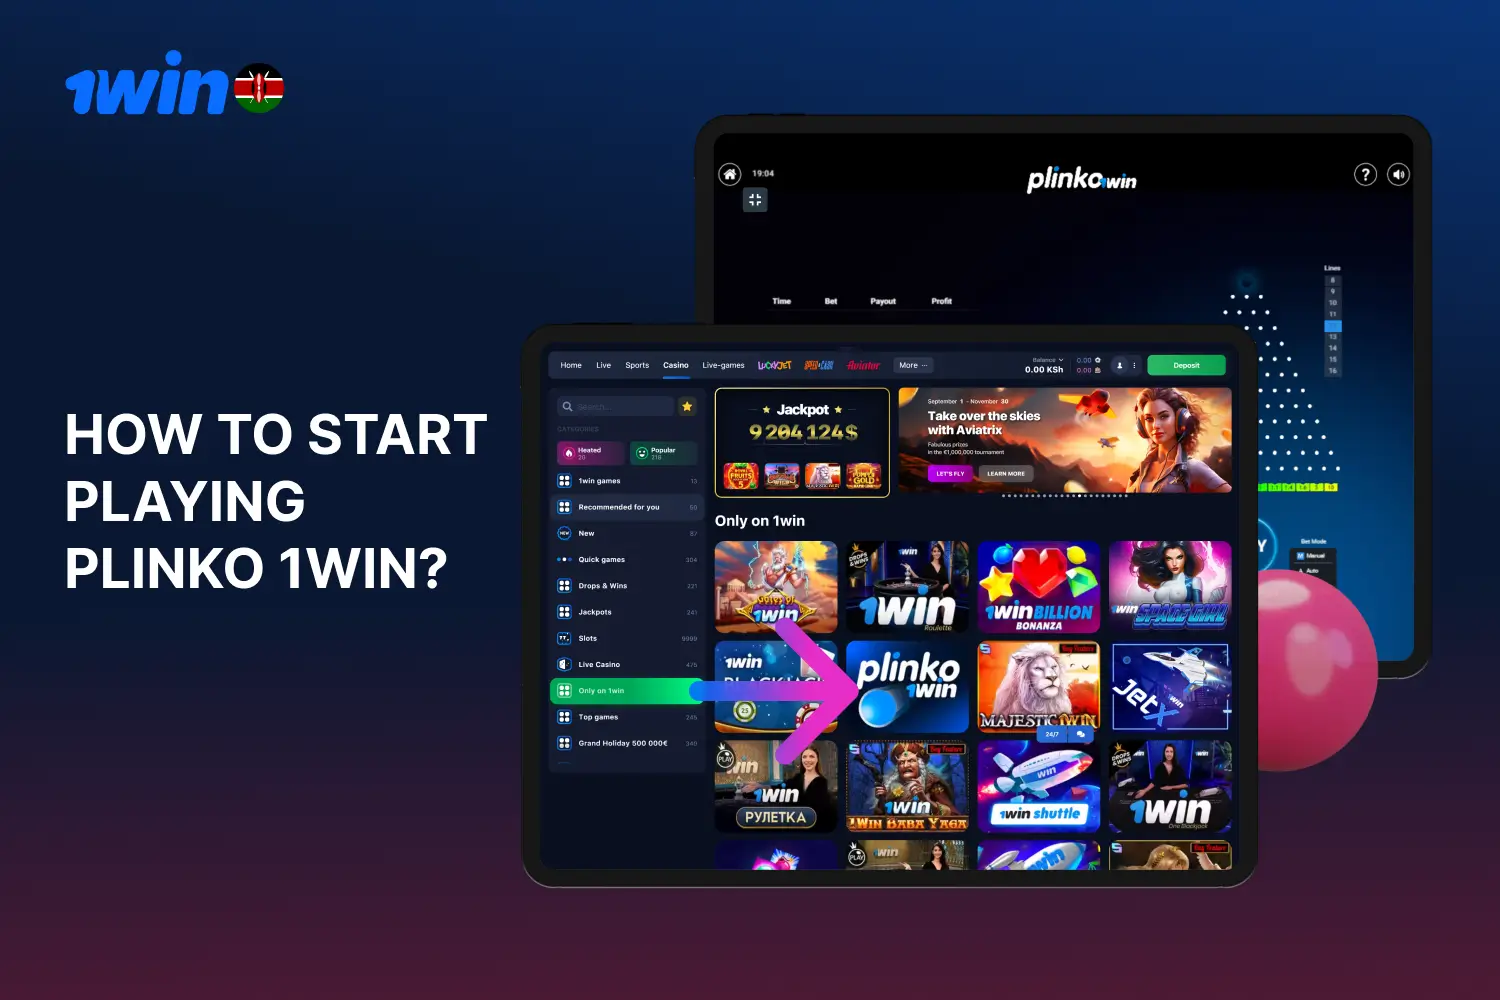 Kenyan users can play Plinko at 1win casino in a few simple steps